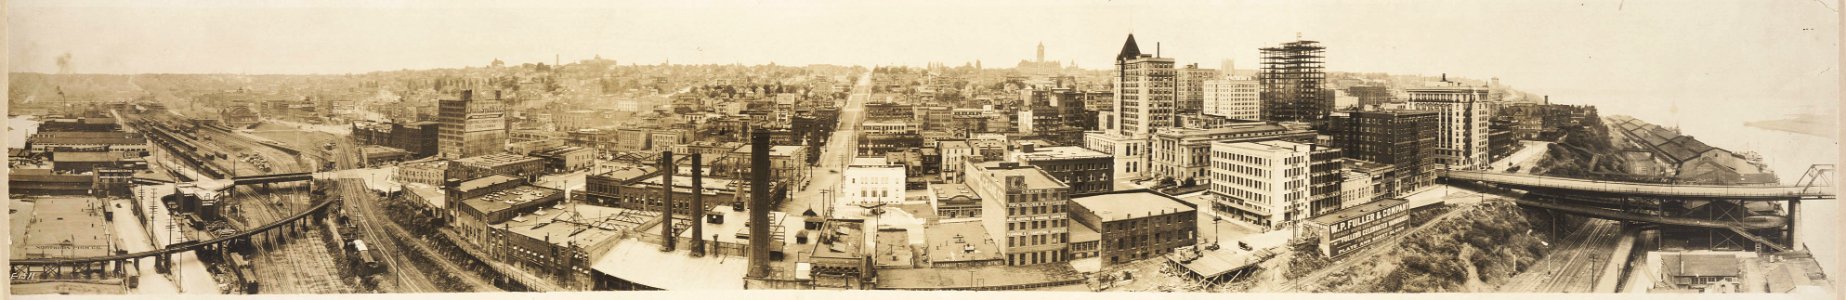 1922 Panoramic view of Tacoma WA looking west